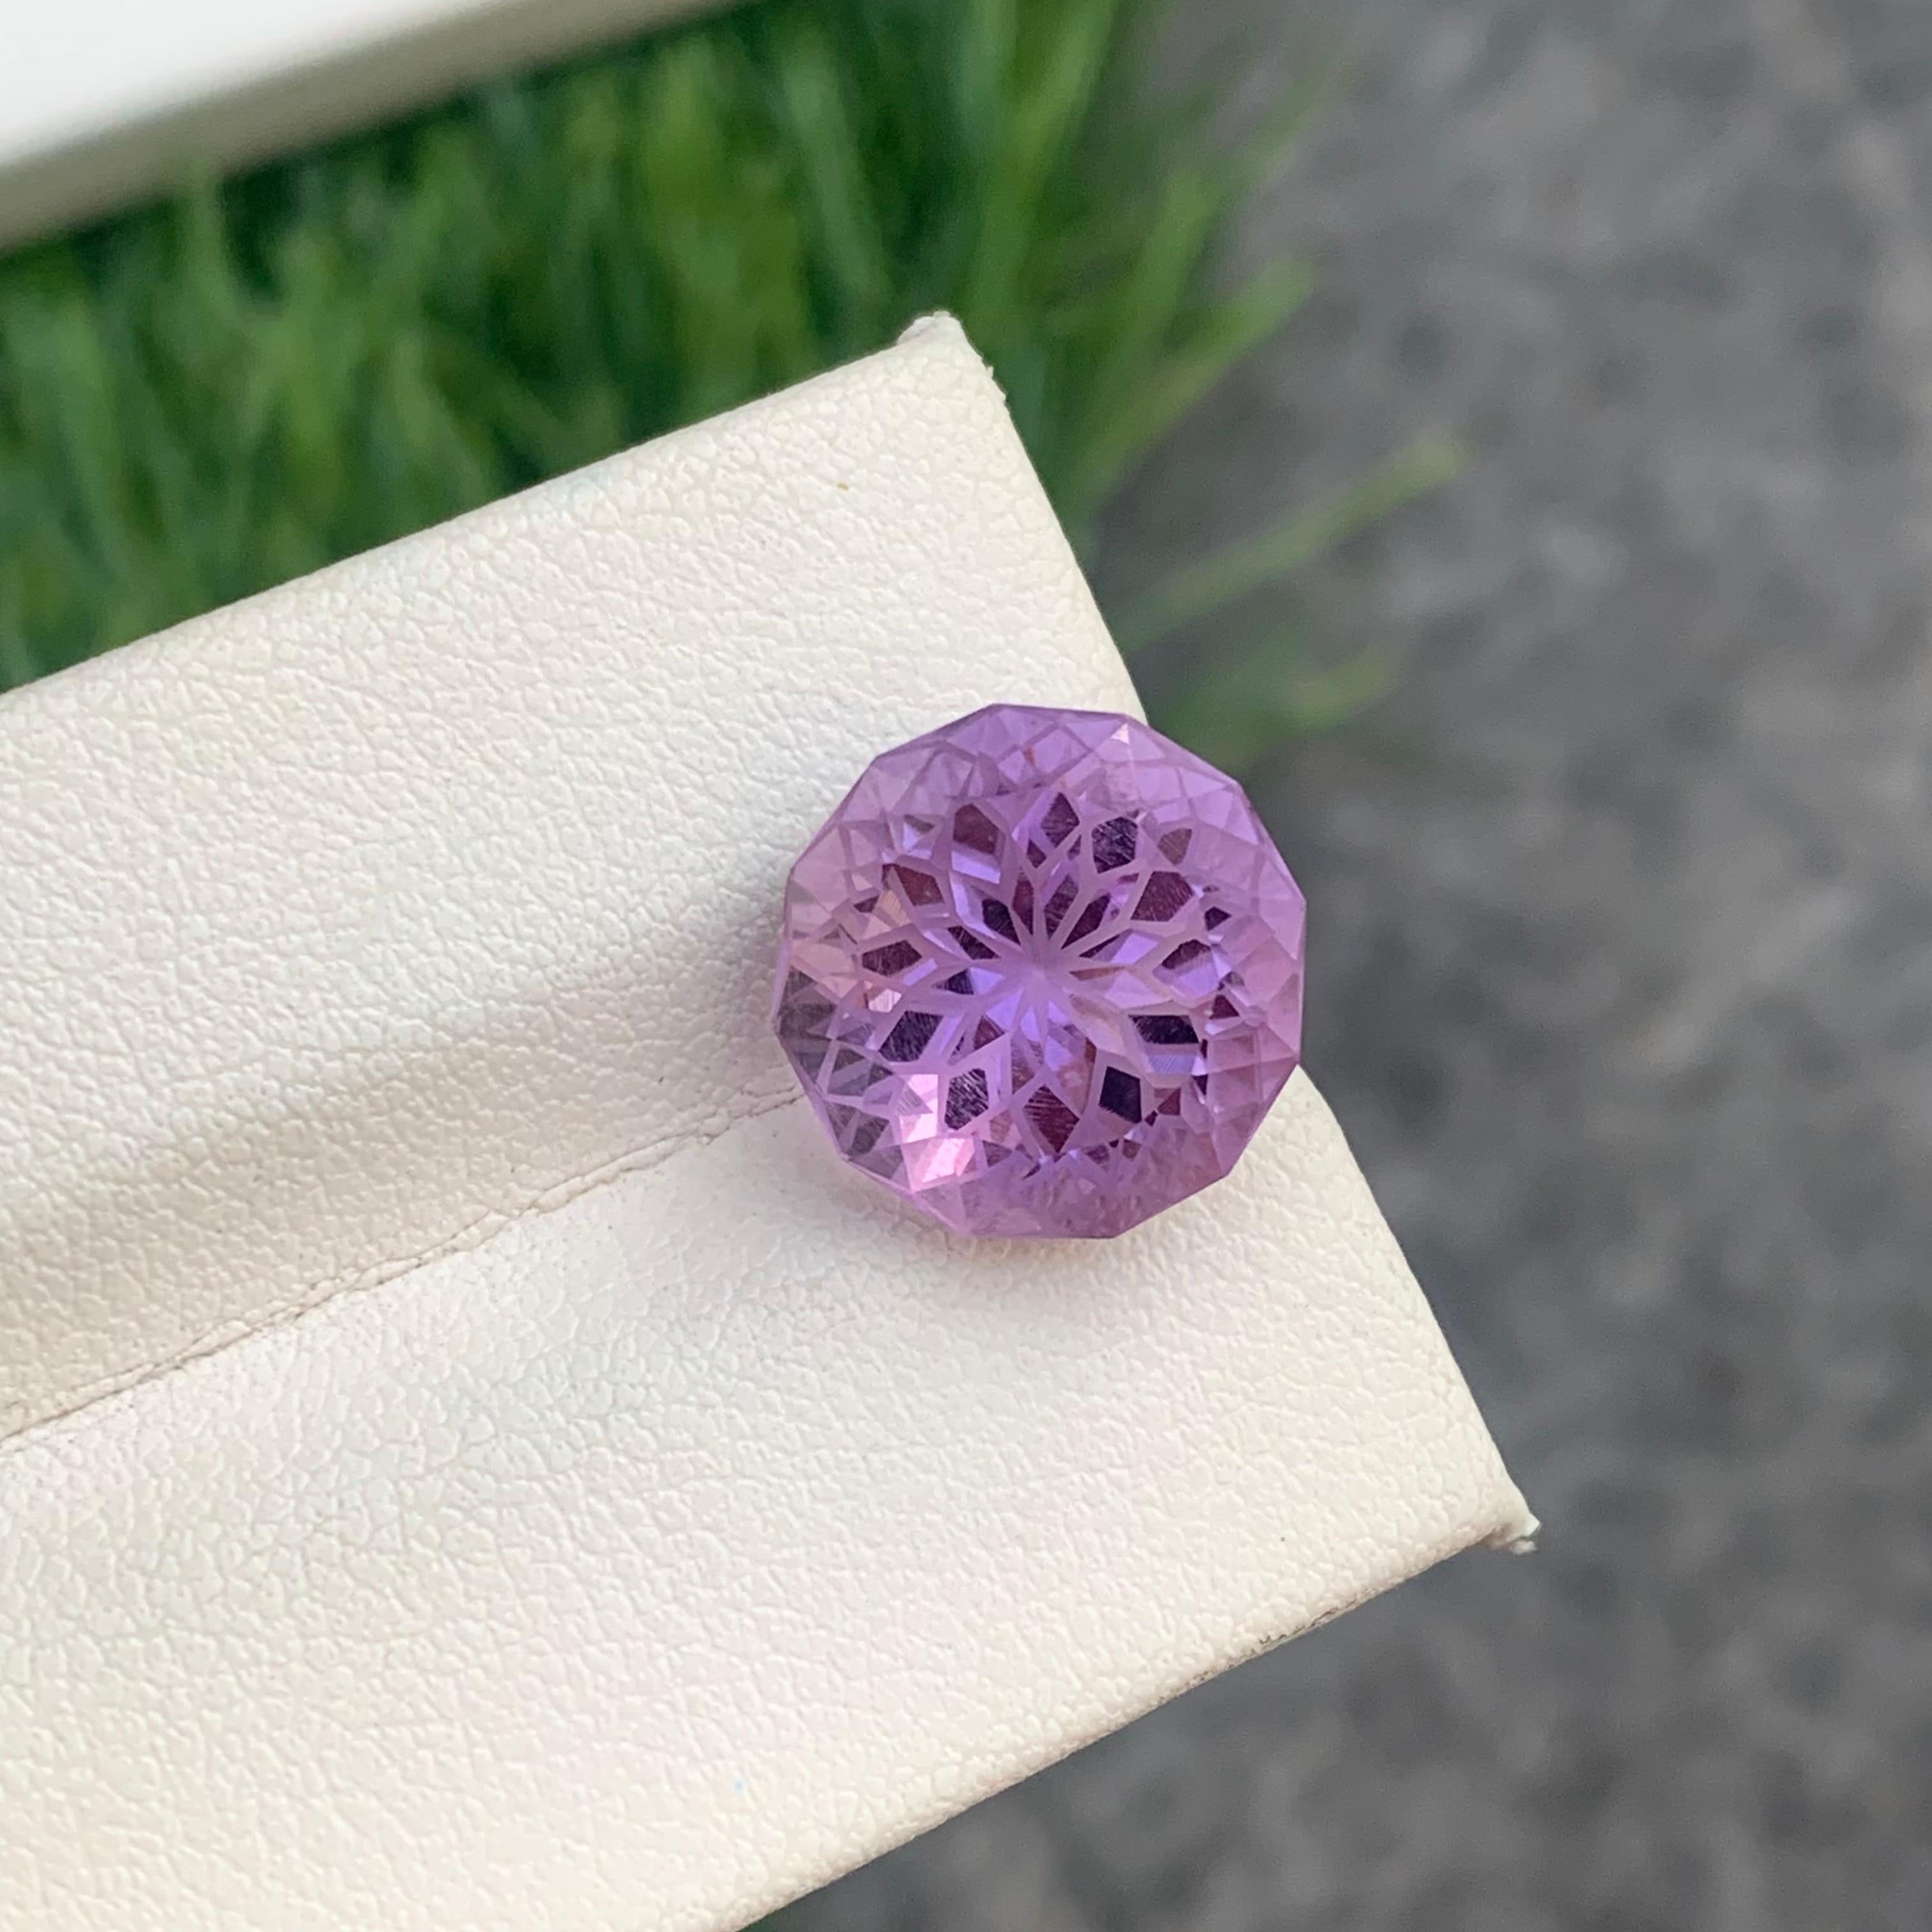 8.50 Carat Gorgeous Natural Loose Round Flower Cut Amethyst Ring Gem from Brazil For Sale 7